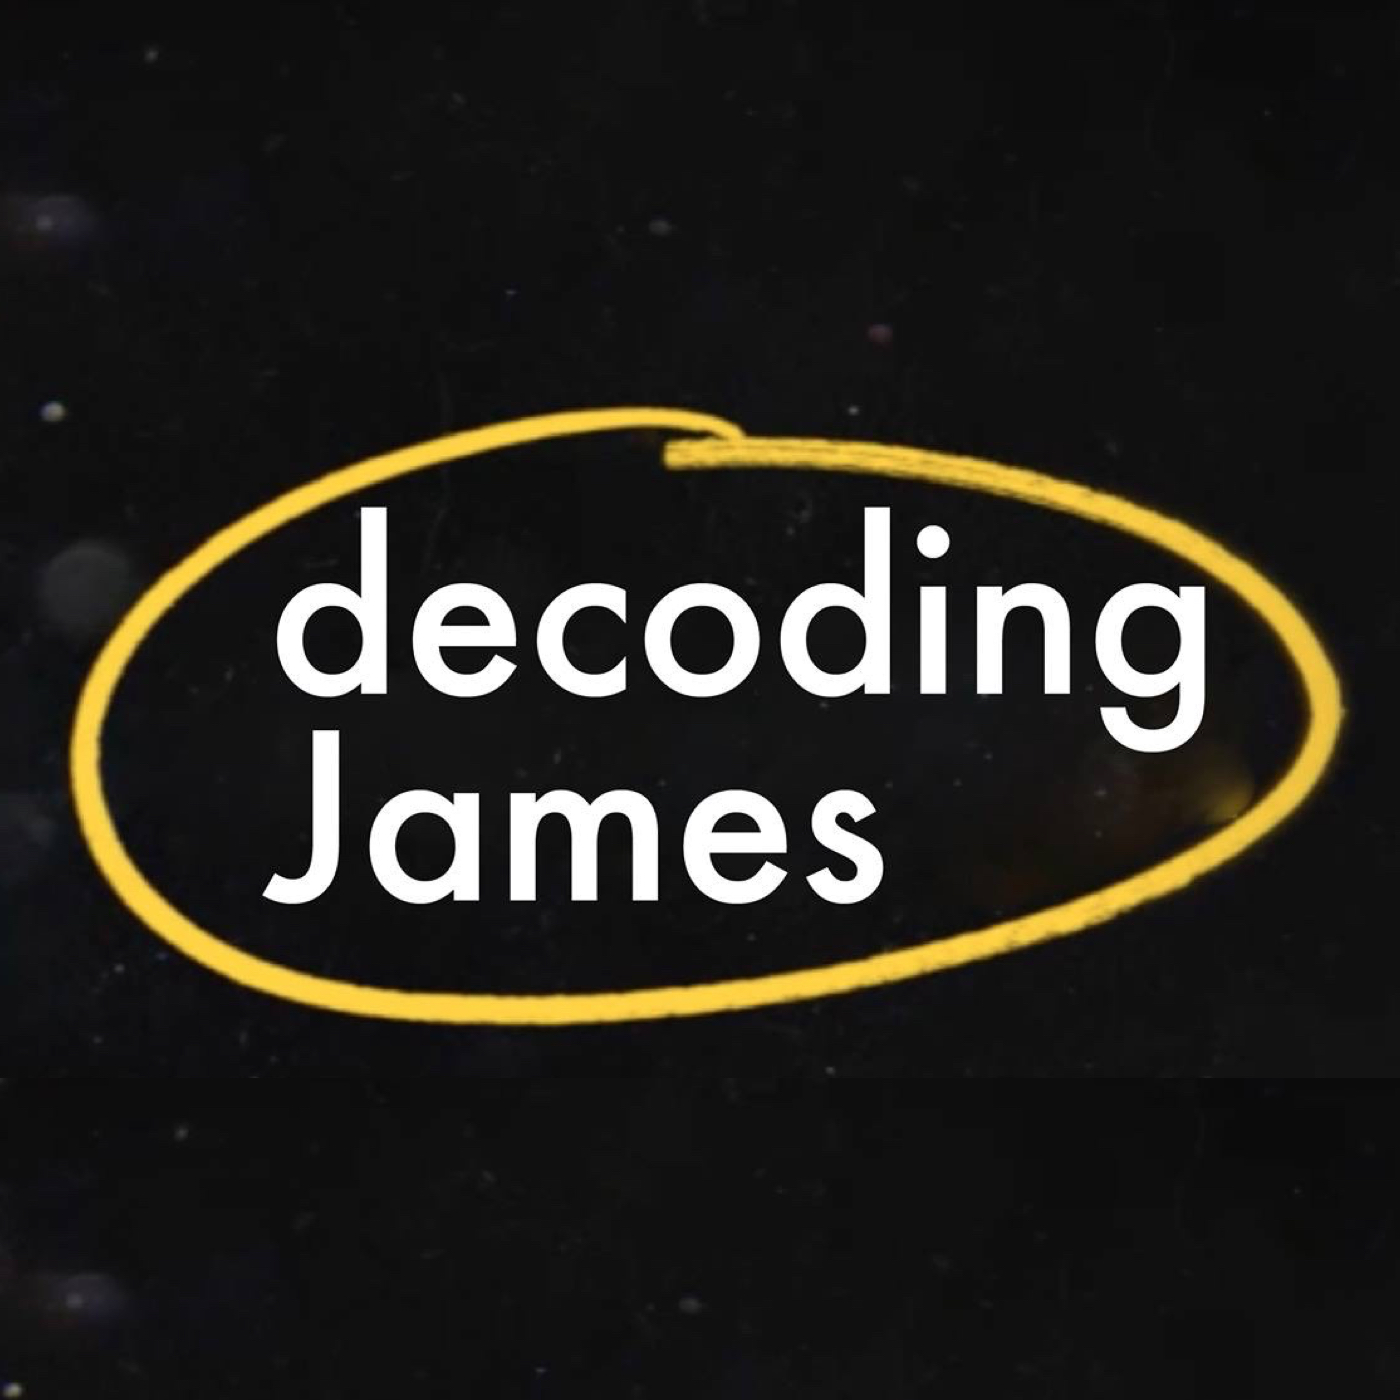 Decoding James Series- Who Dunnit?